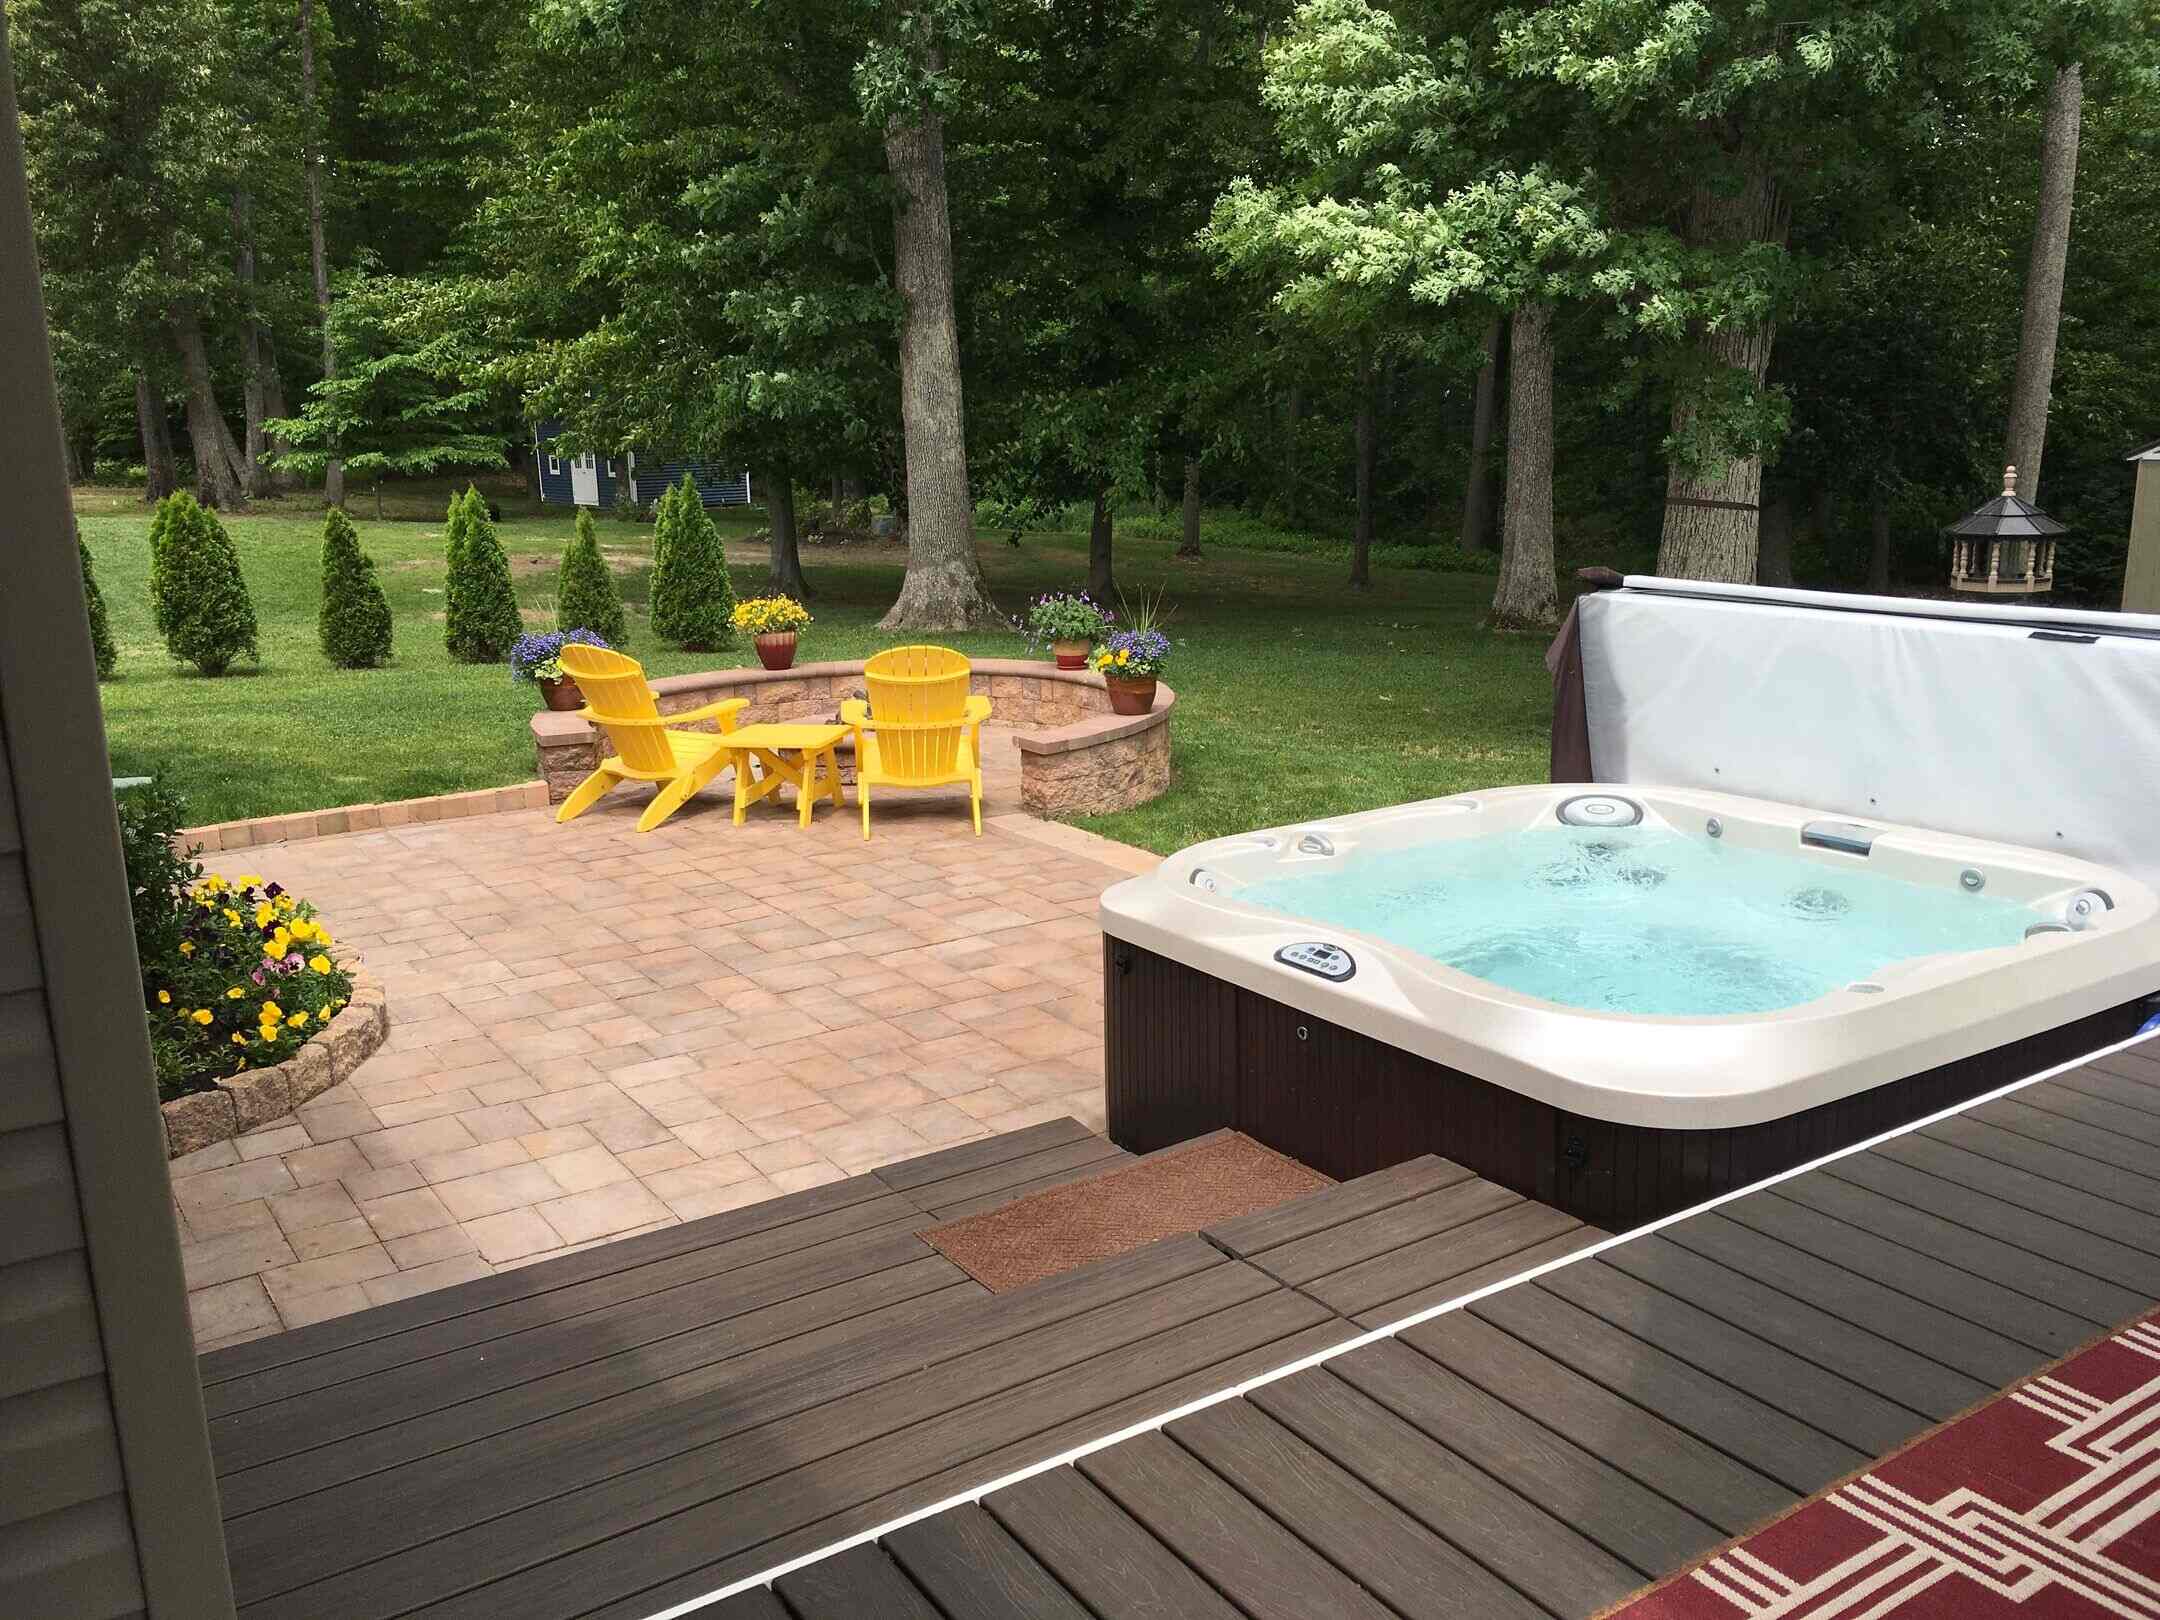 How To Build A Paver Patio For A Hot Tub